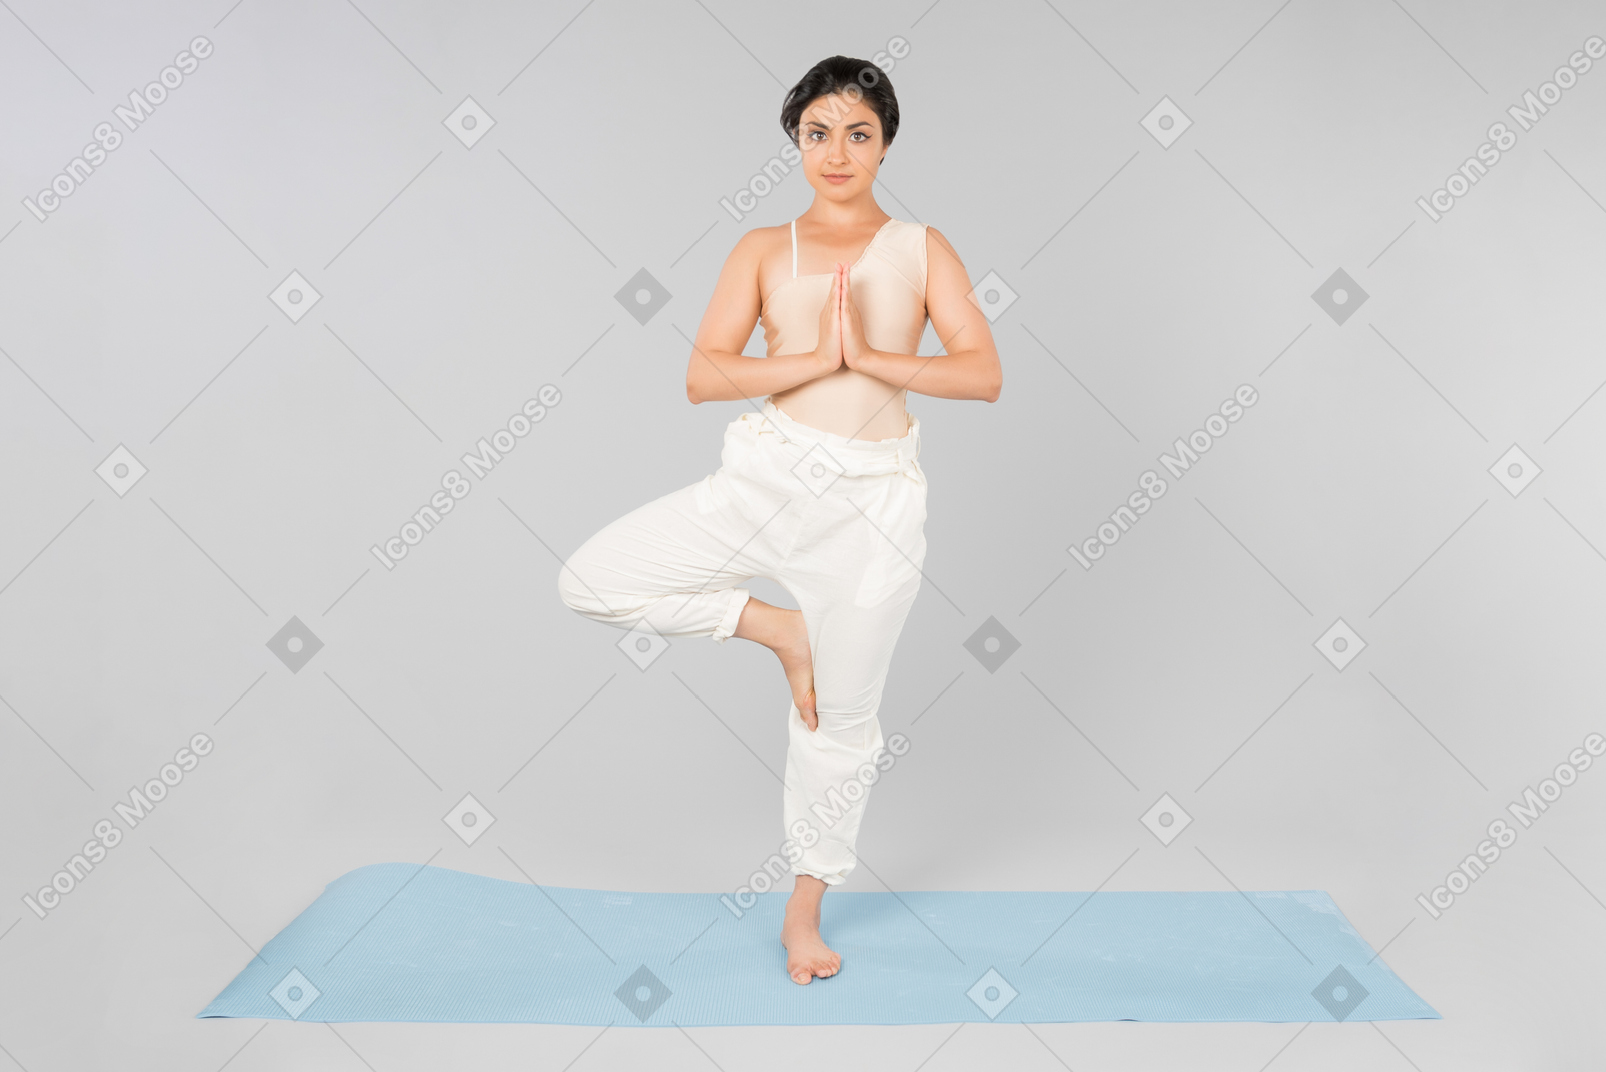 Young indian woman standing in tree position on yoga mat